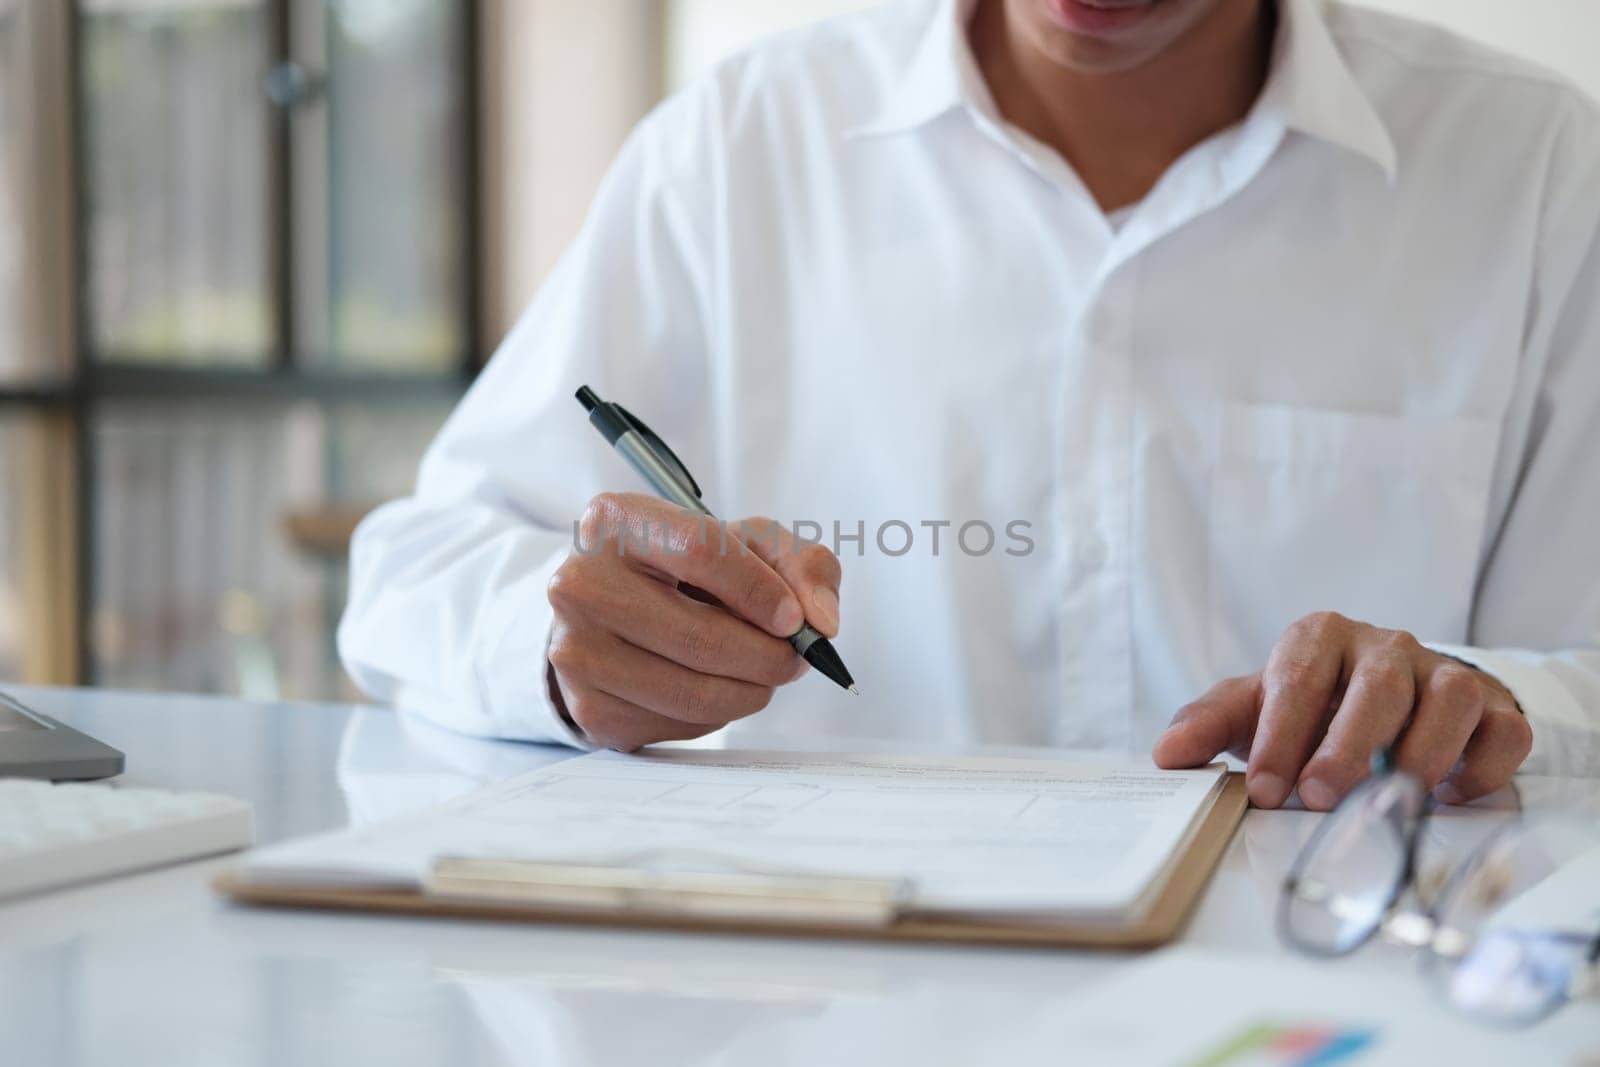 A man is writing on a piece of paper with a pen. He is wearing a white shirt and glasses